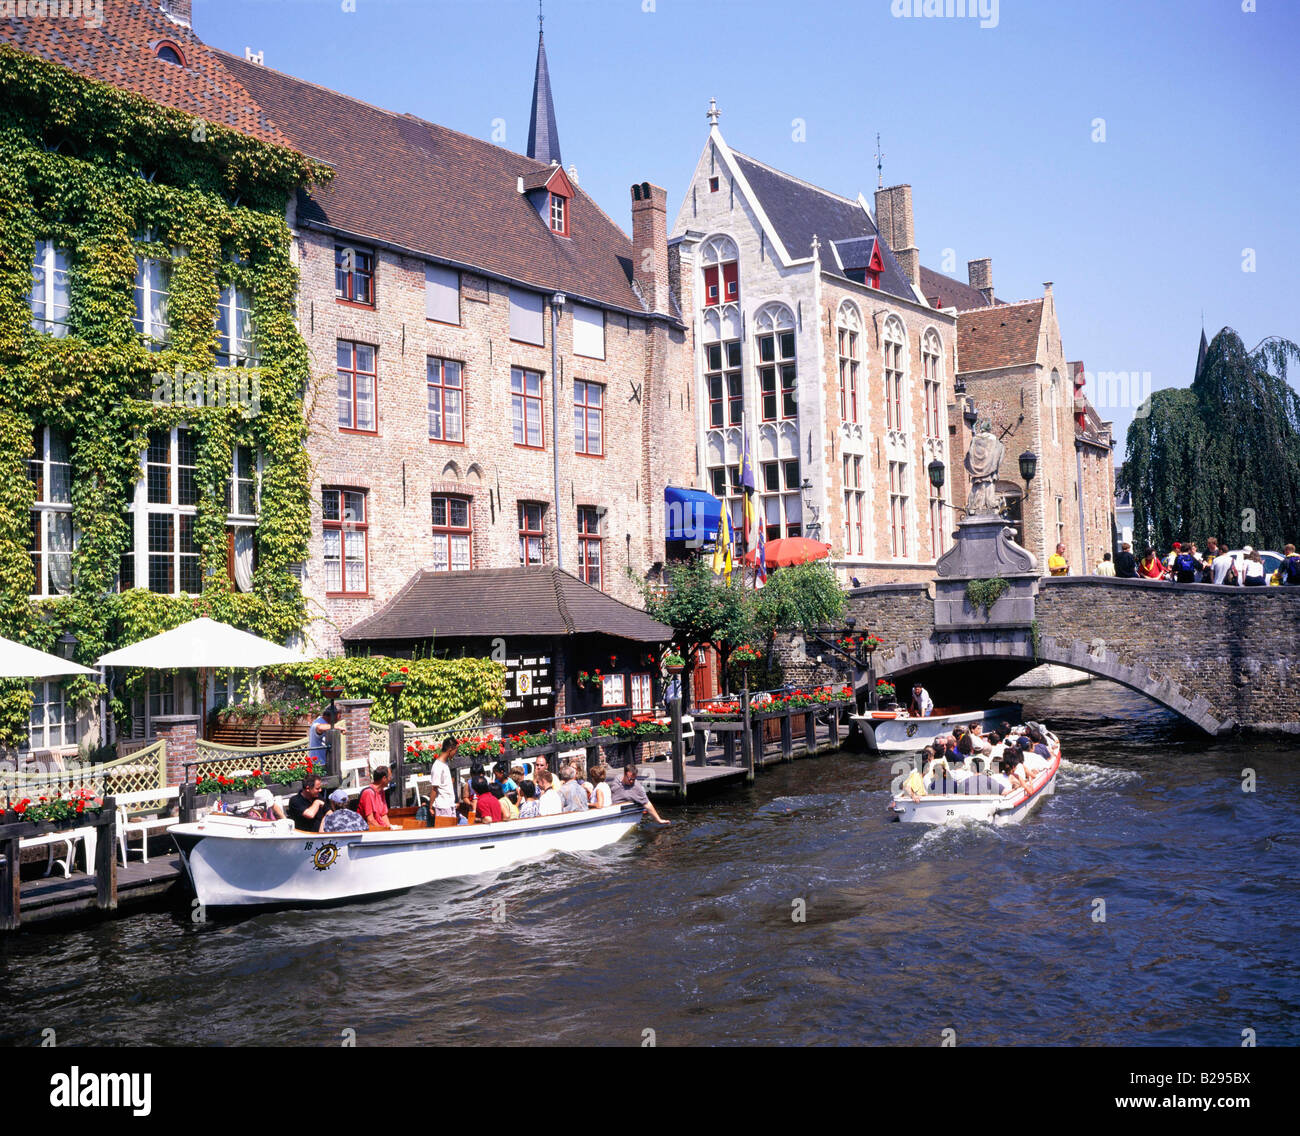 BELGIUM Bruges Canal Trips Date 10 06 2008 Ref ZB704 114941 0002 COMPULSORY CREDIT World Pictures Photoshot Stock Photo